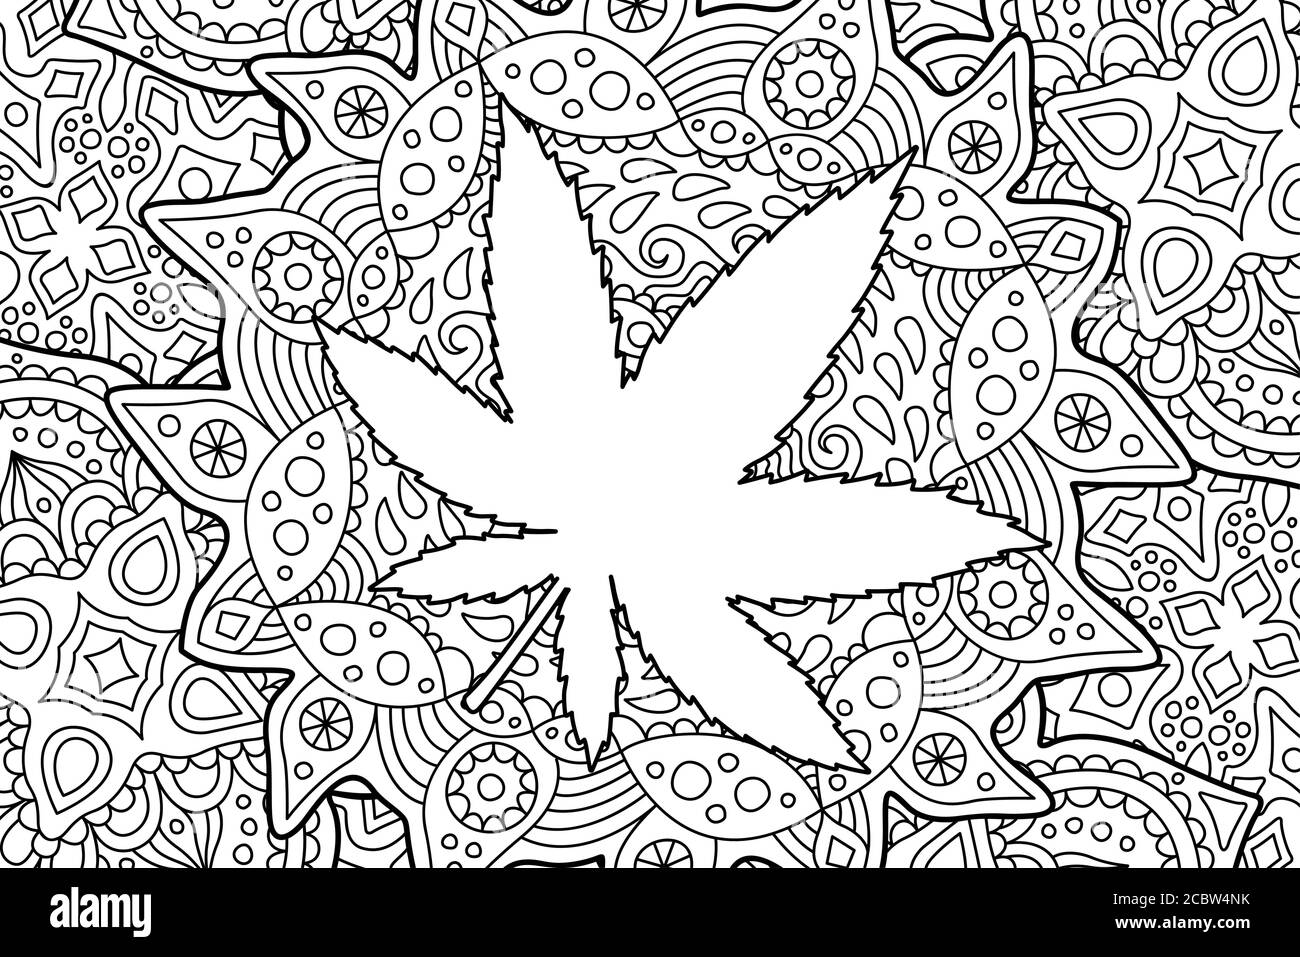 Beautiful adult coloring book page with white cannabis leaf silhouette stock vector image art